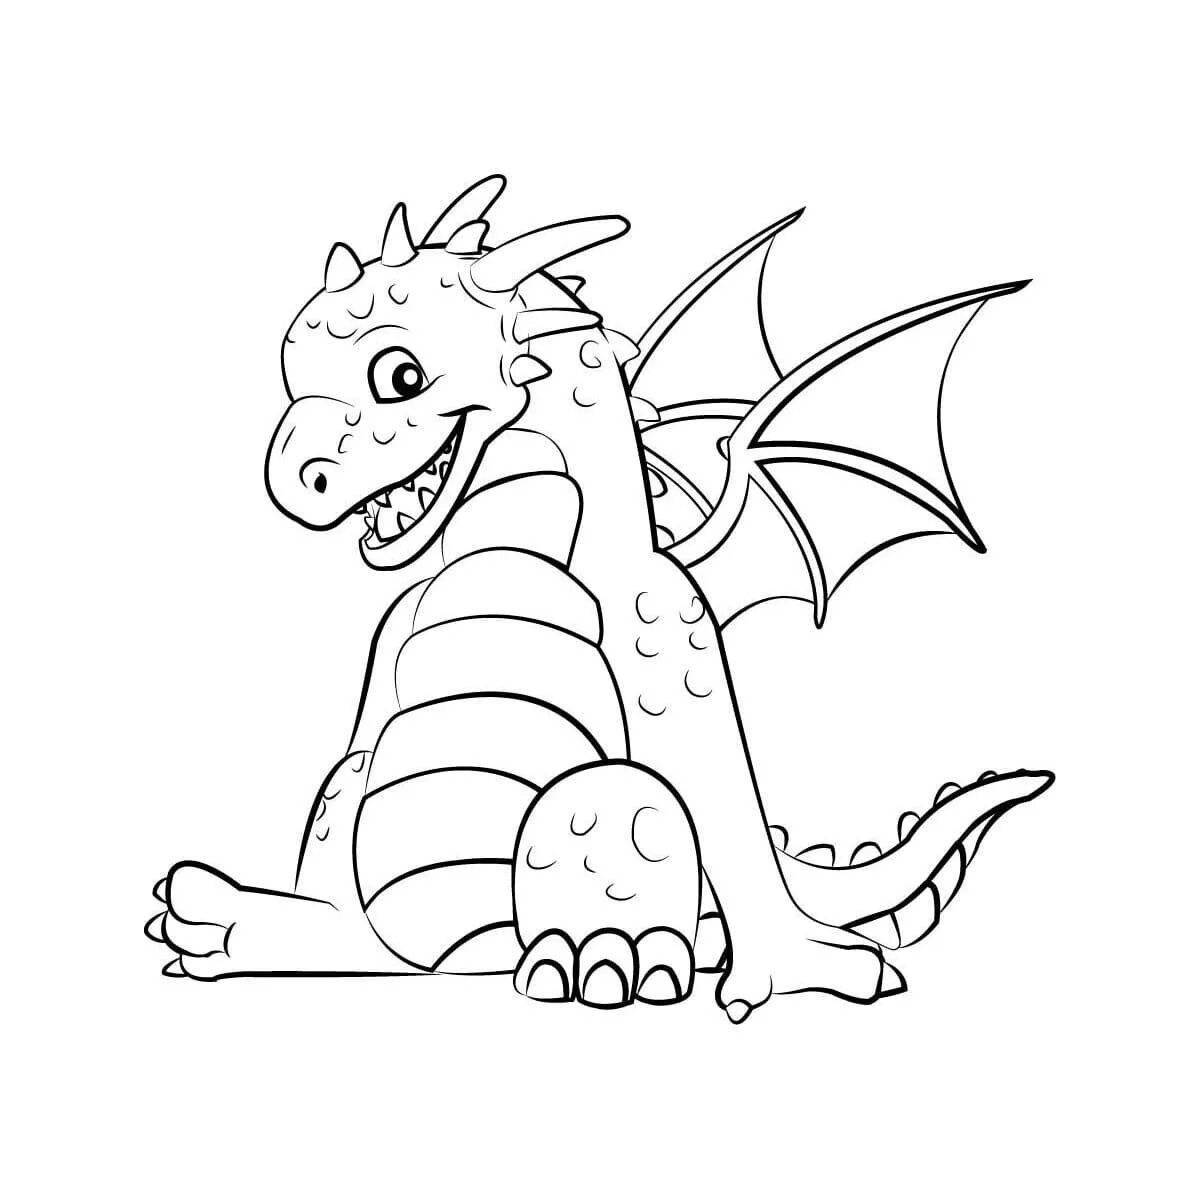 Creative coloring dragons for children 4-5 years old